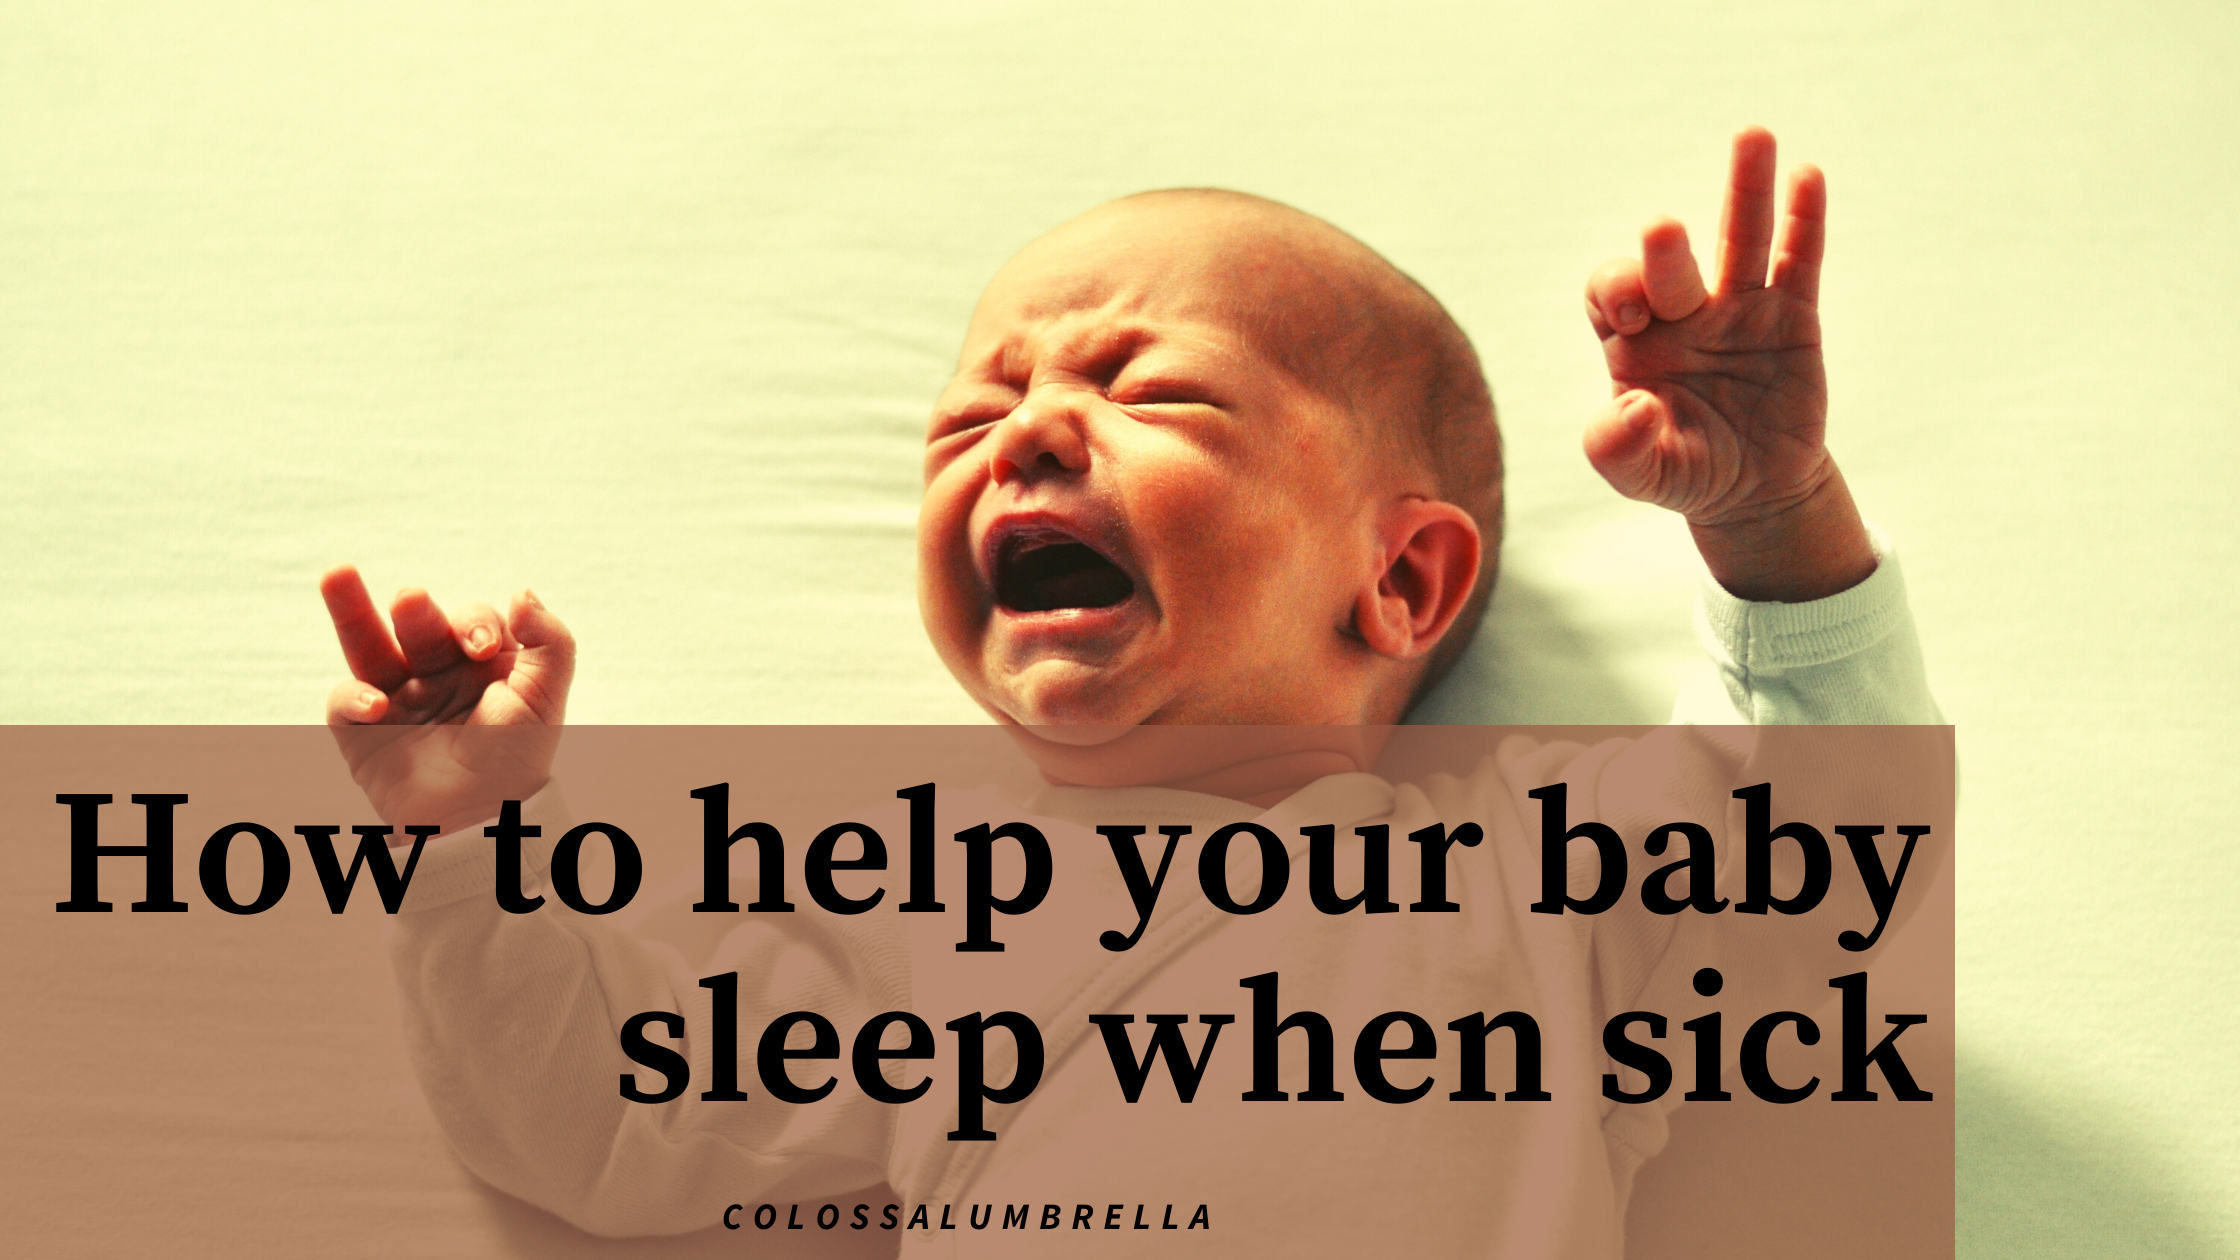 7 effective tips on how to help your baby sleep when sick (and what NOT to do!)